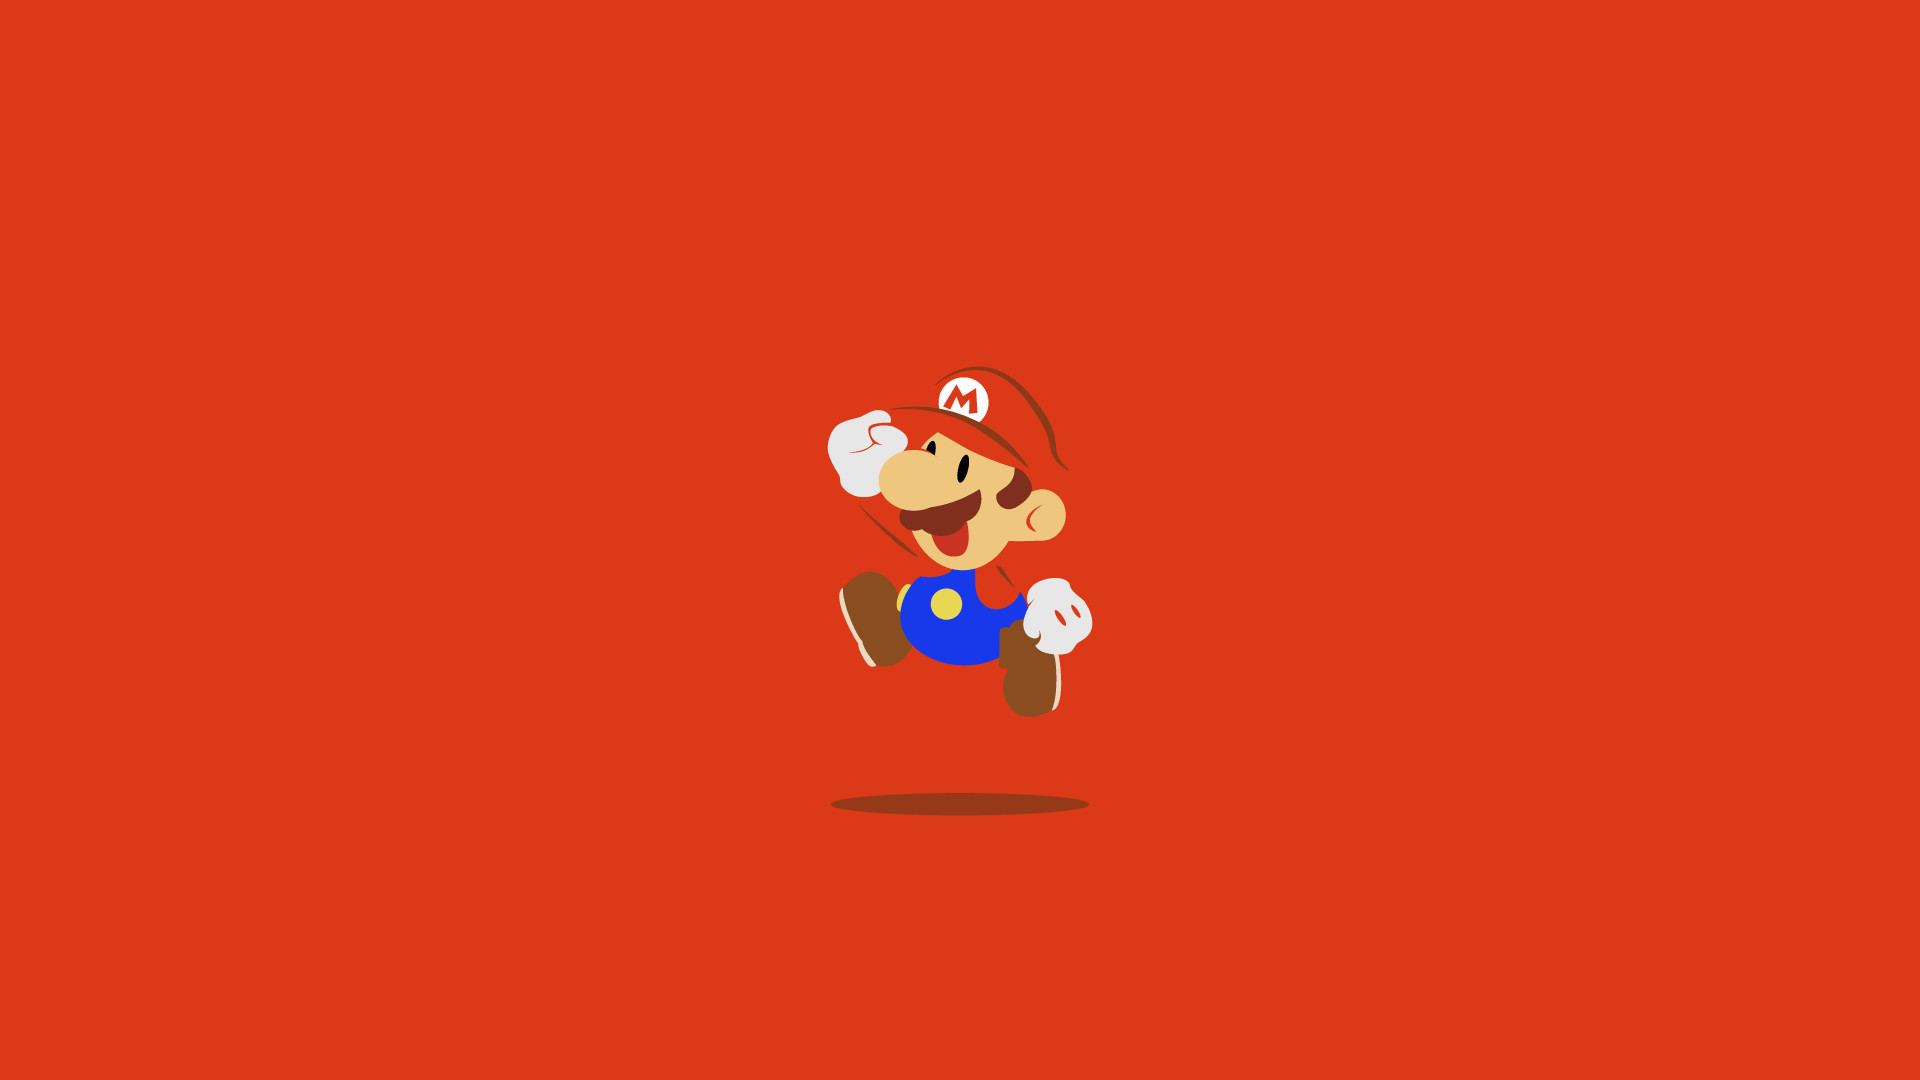 1920x1080 ... BsnSCB High Definition Collection: Paper Mario Wallpapers, 38 Full HD .